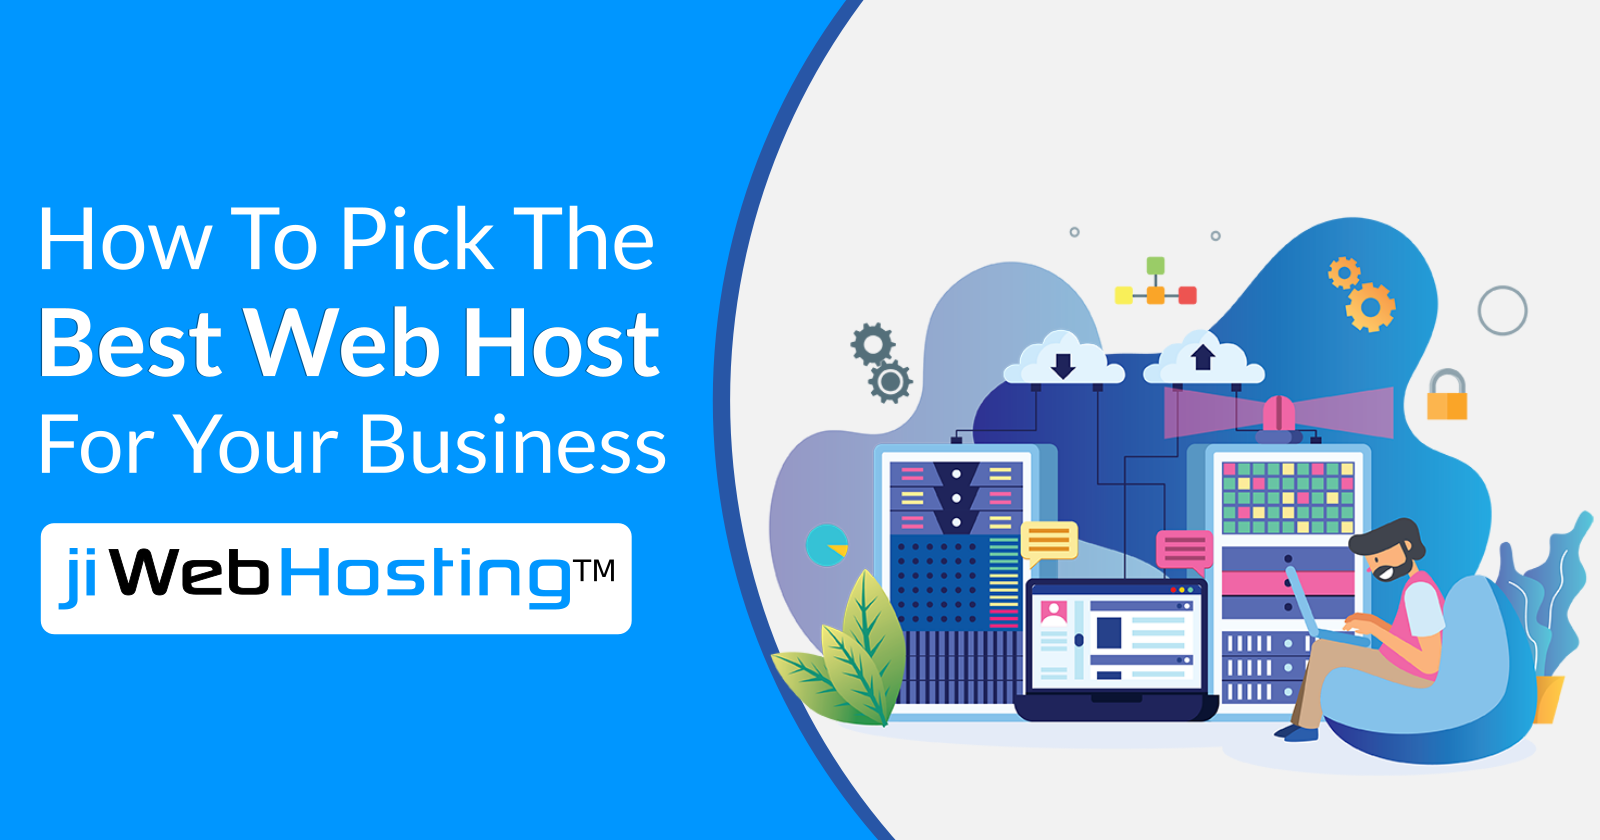 How To Pick The Best Web Host For Your Business?